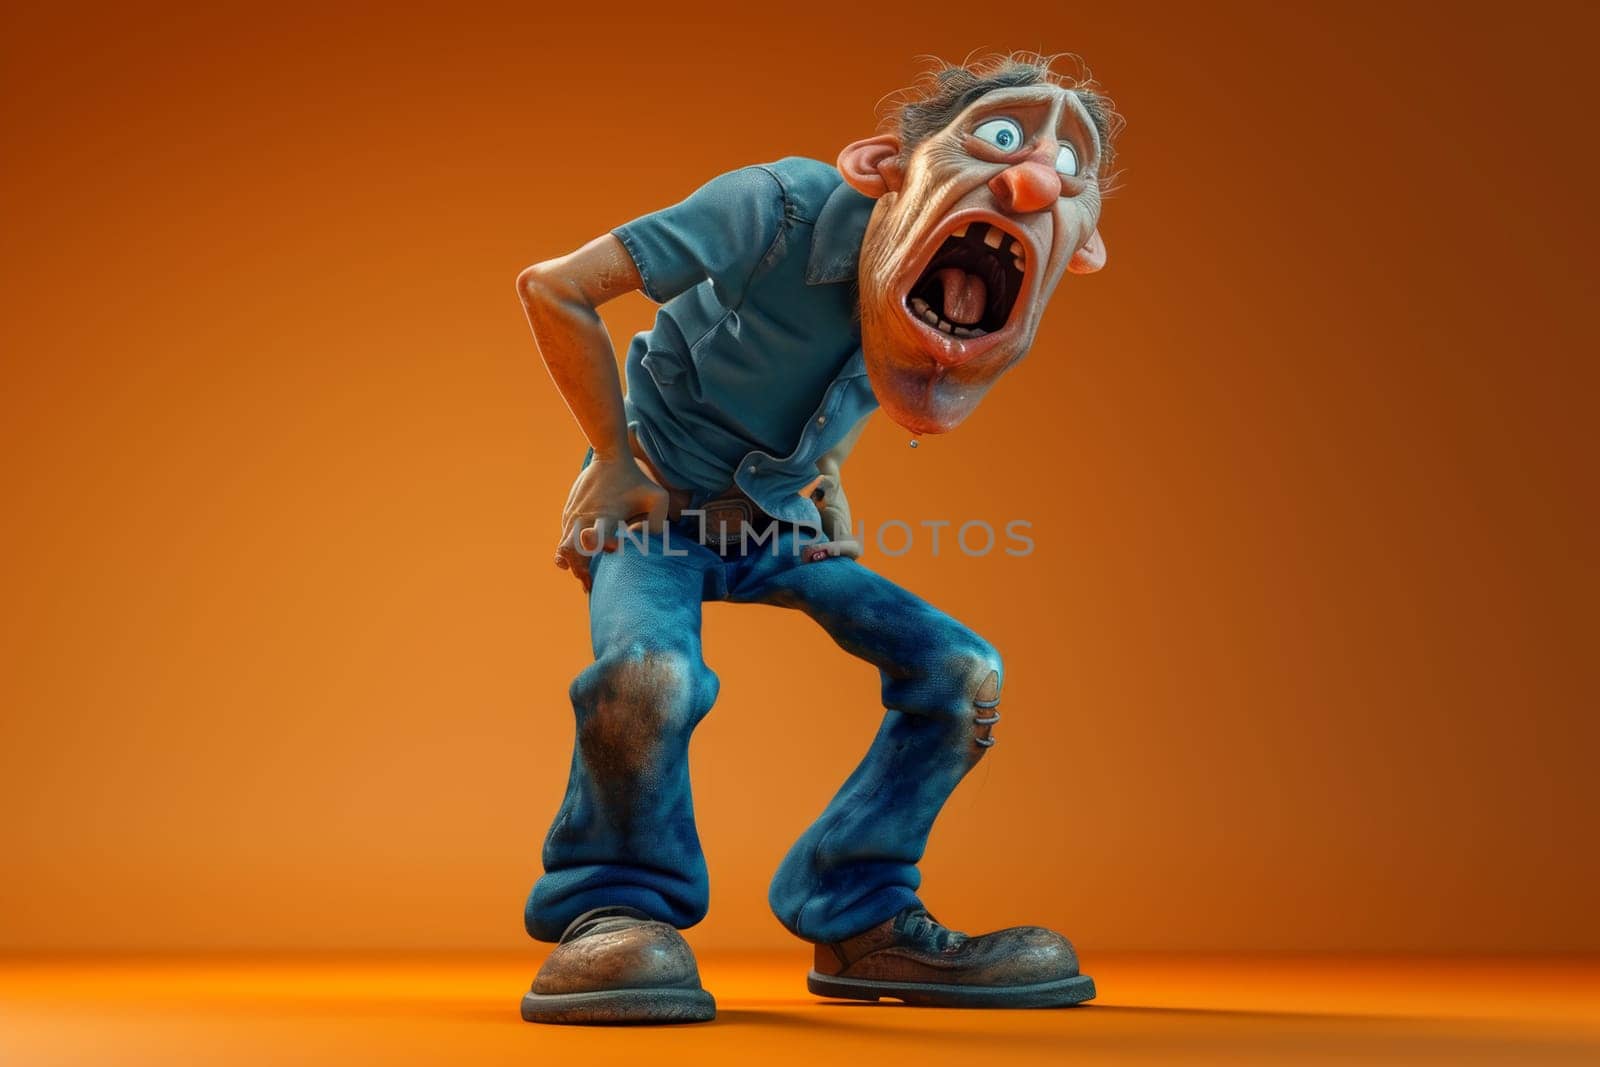 Cartoon character men are afraid of fear, screaming and scared. 3d illustration.